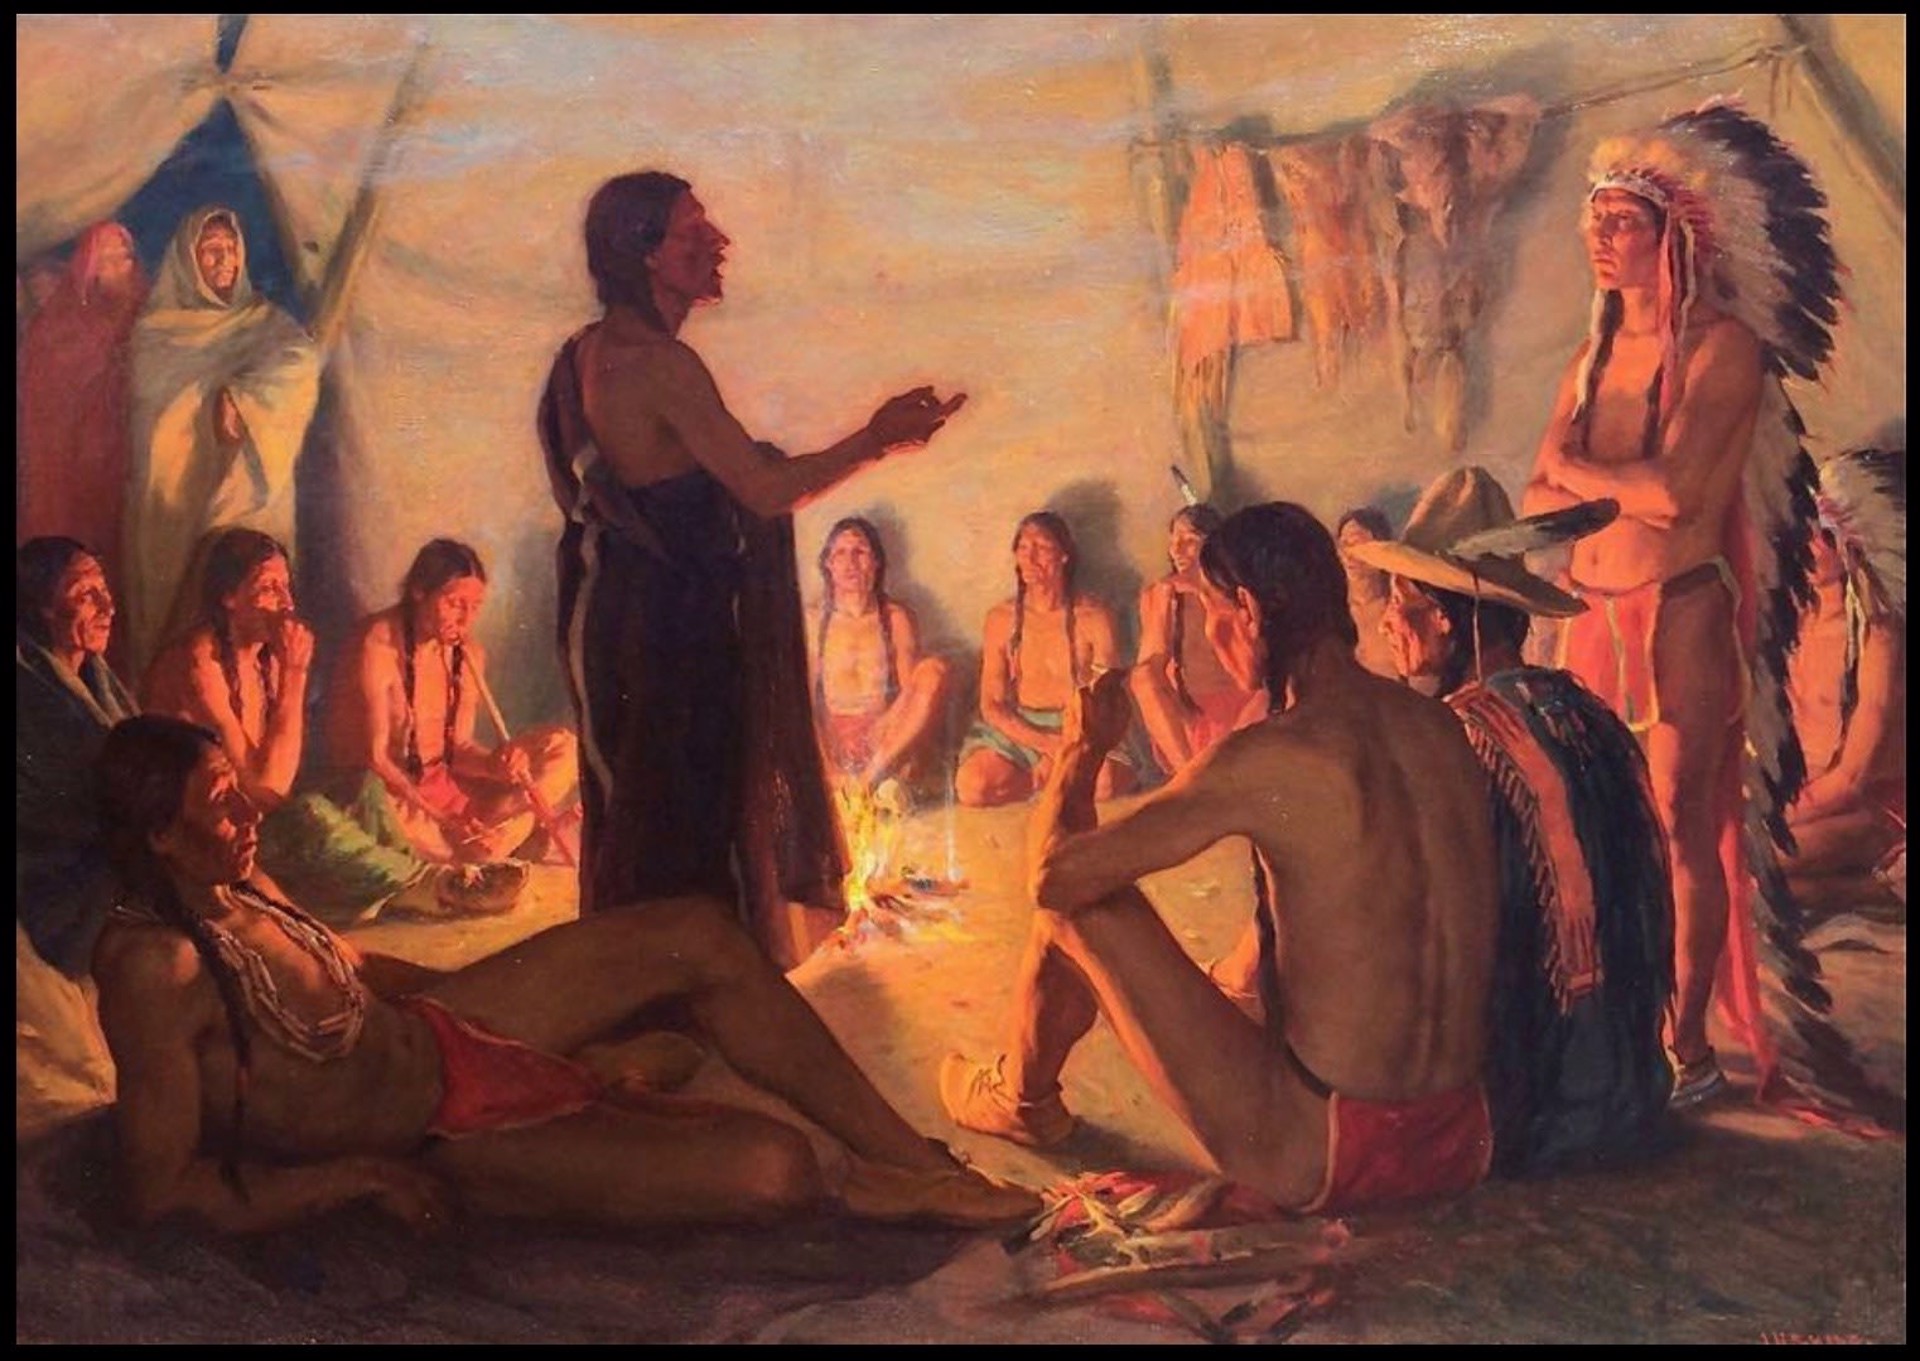 COUNSEL OF THE CHIEFS by Joseph Henry Sharp [1859-1953]